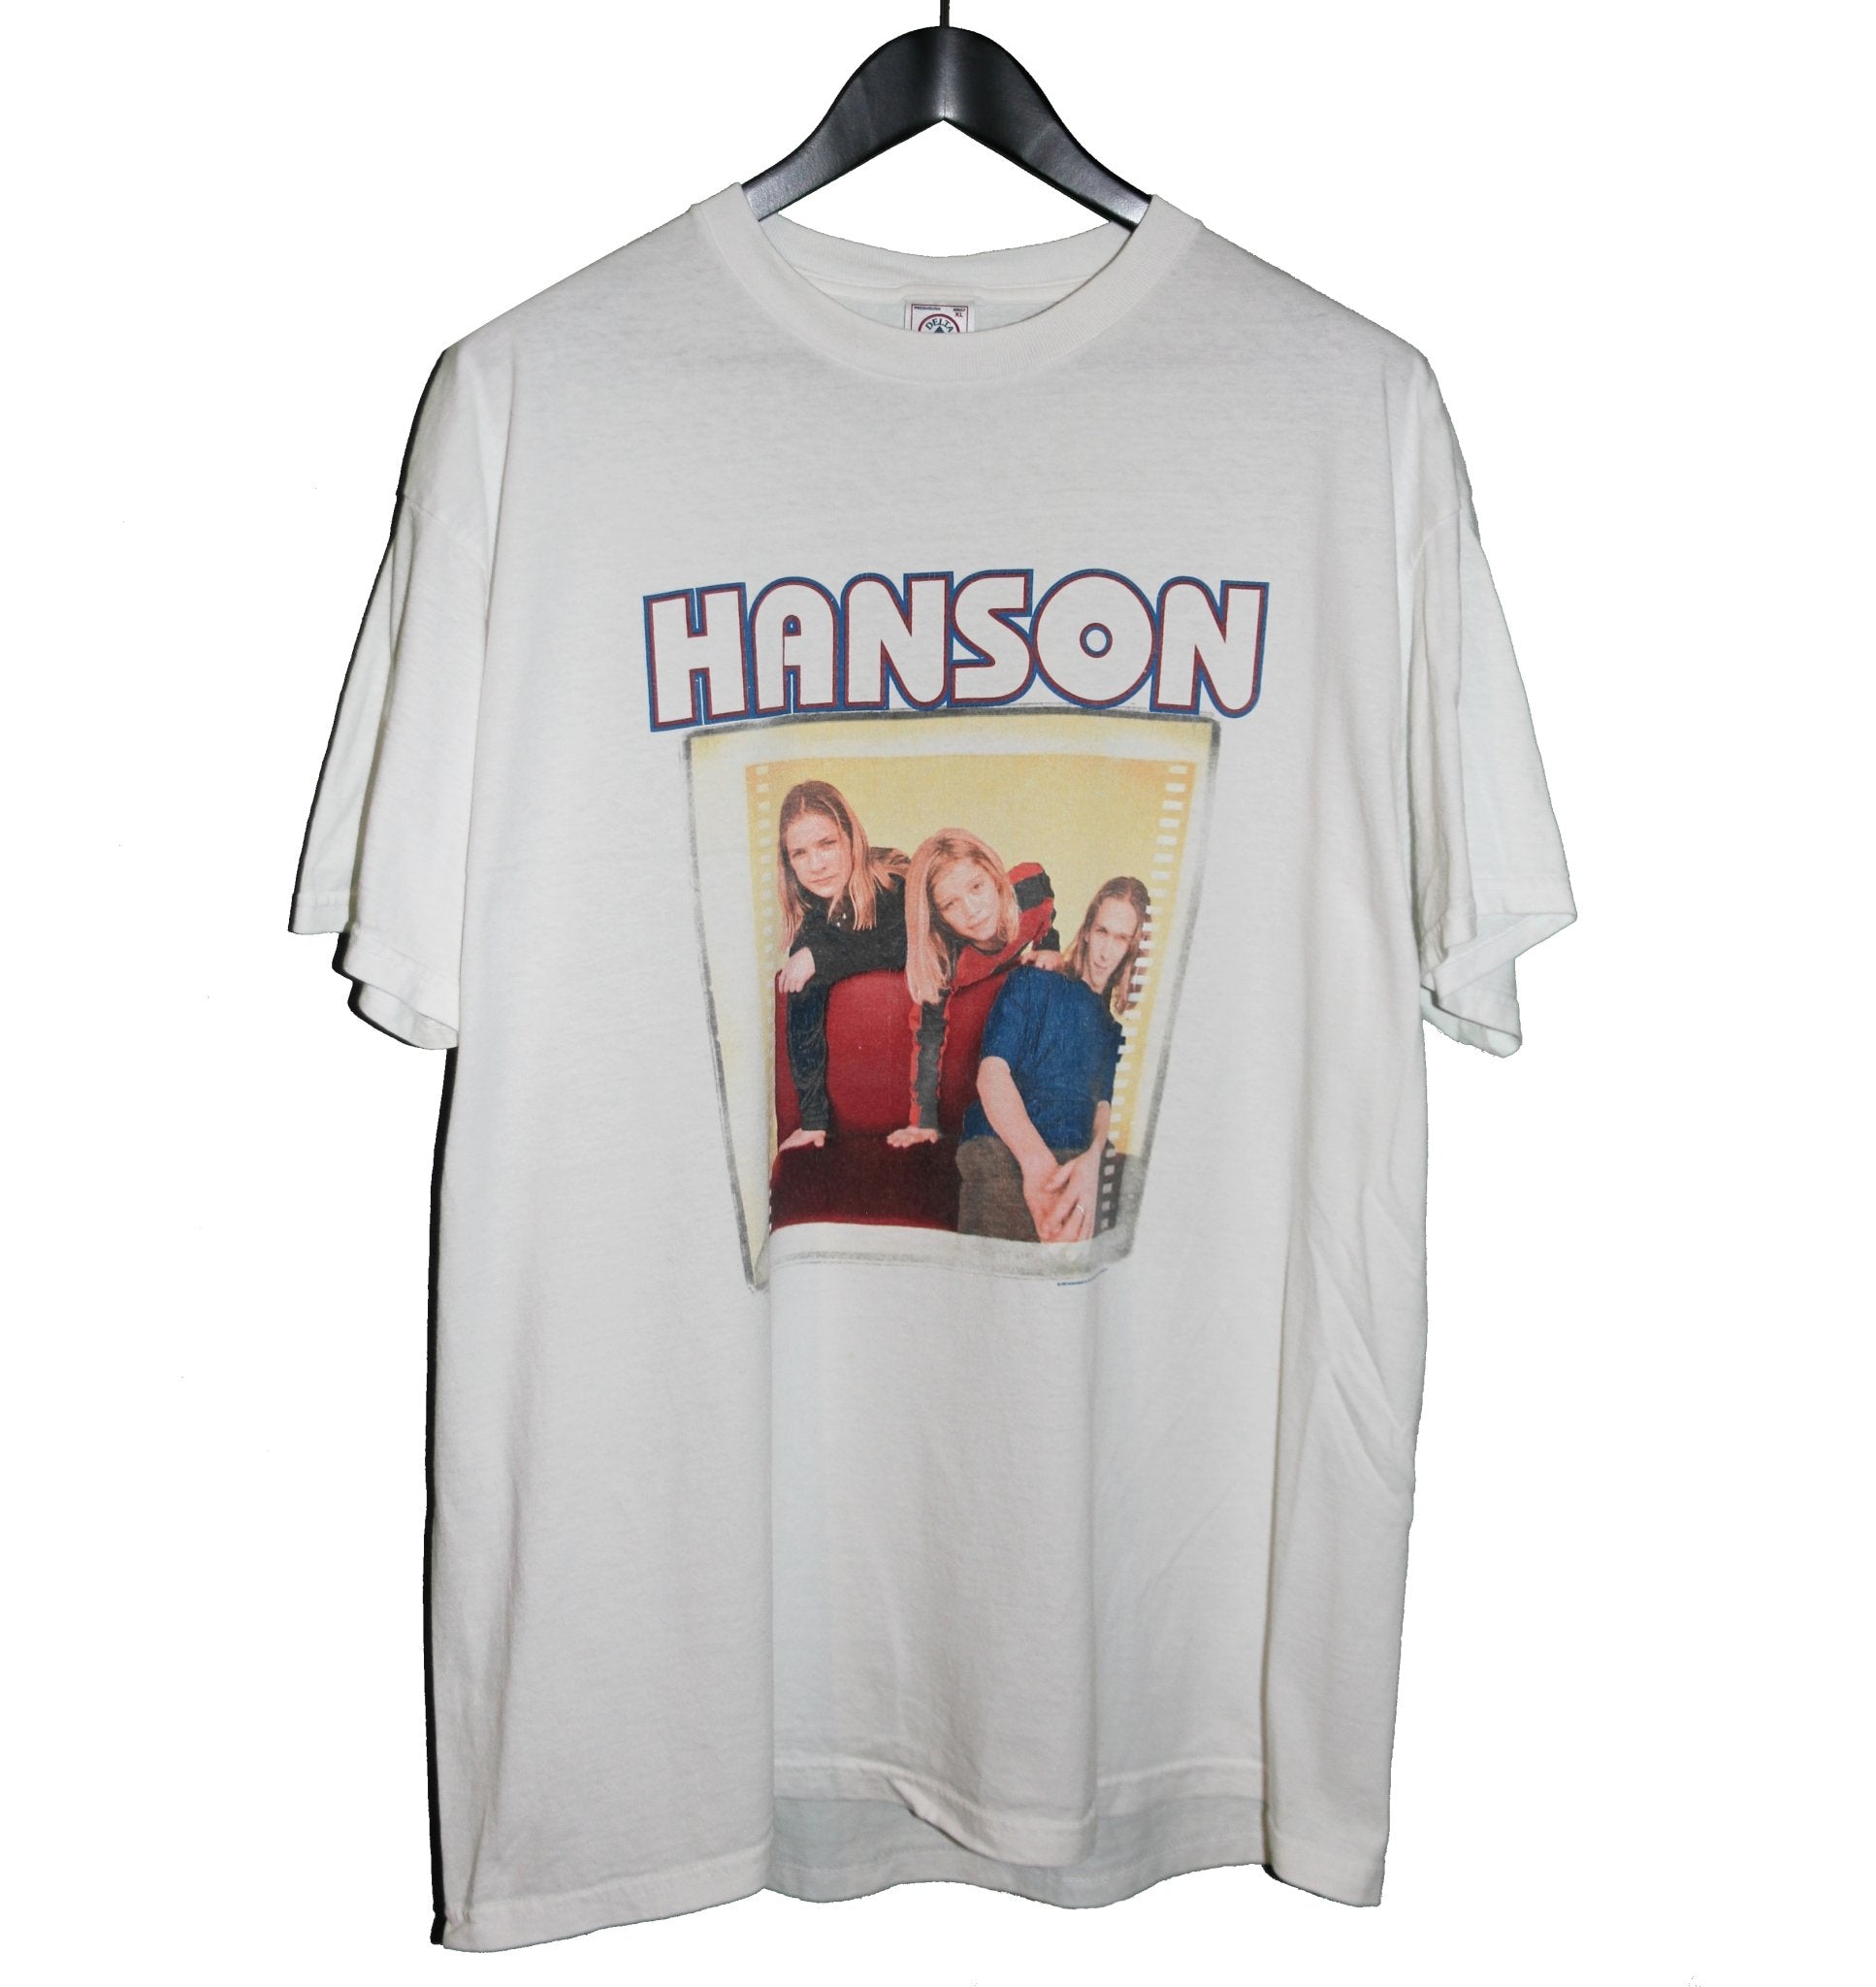 Hanson 1997 Middle of Nowhere Shirt - Faded AU